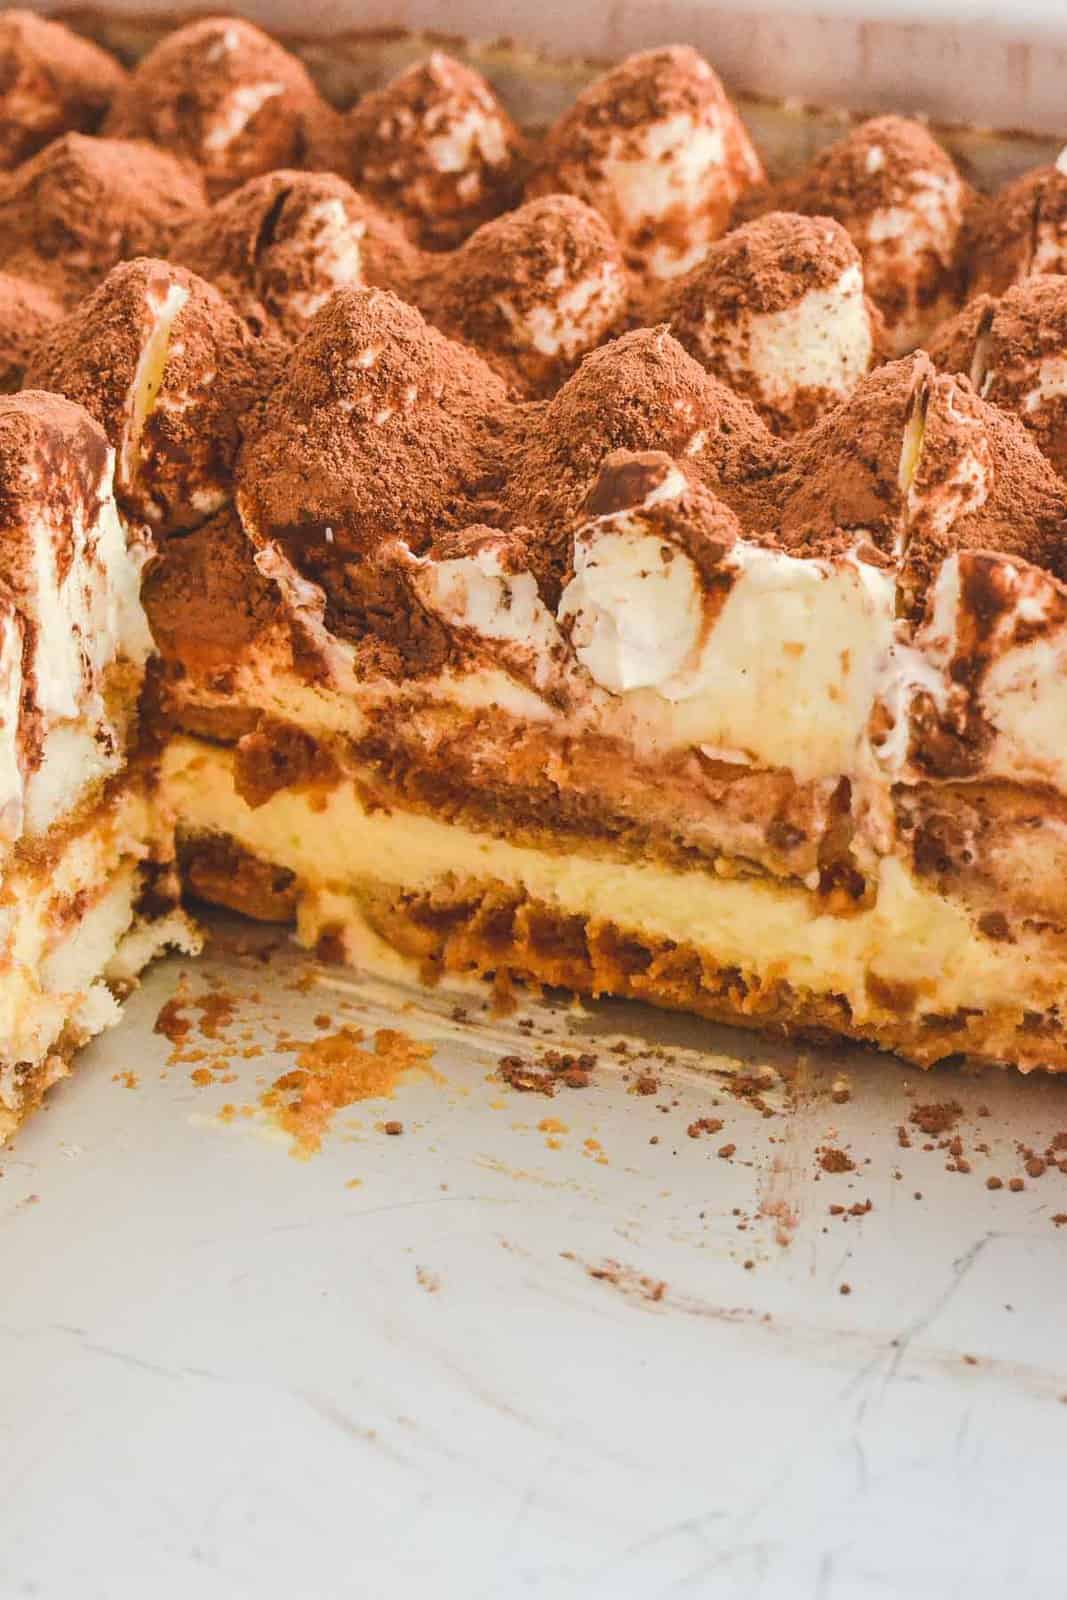 A creamy dessert with layers of biscuits, mascarpone, coffee, whipped cream and cocoa.